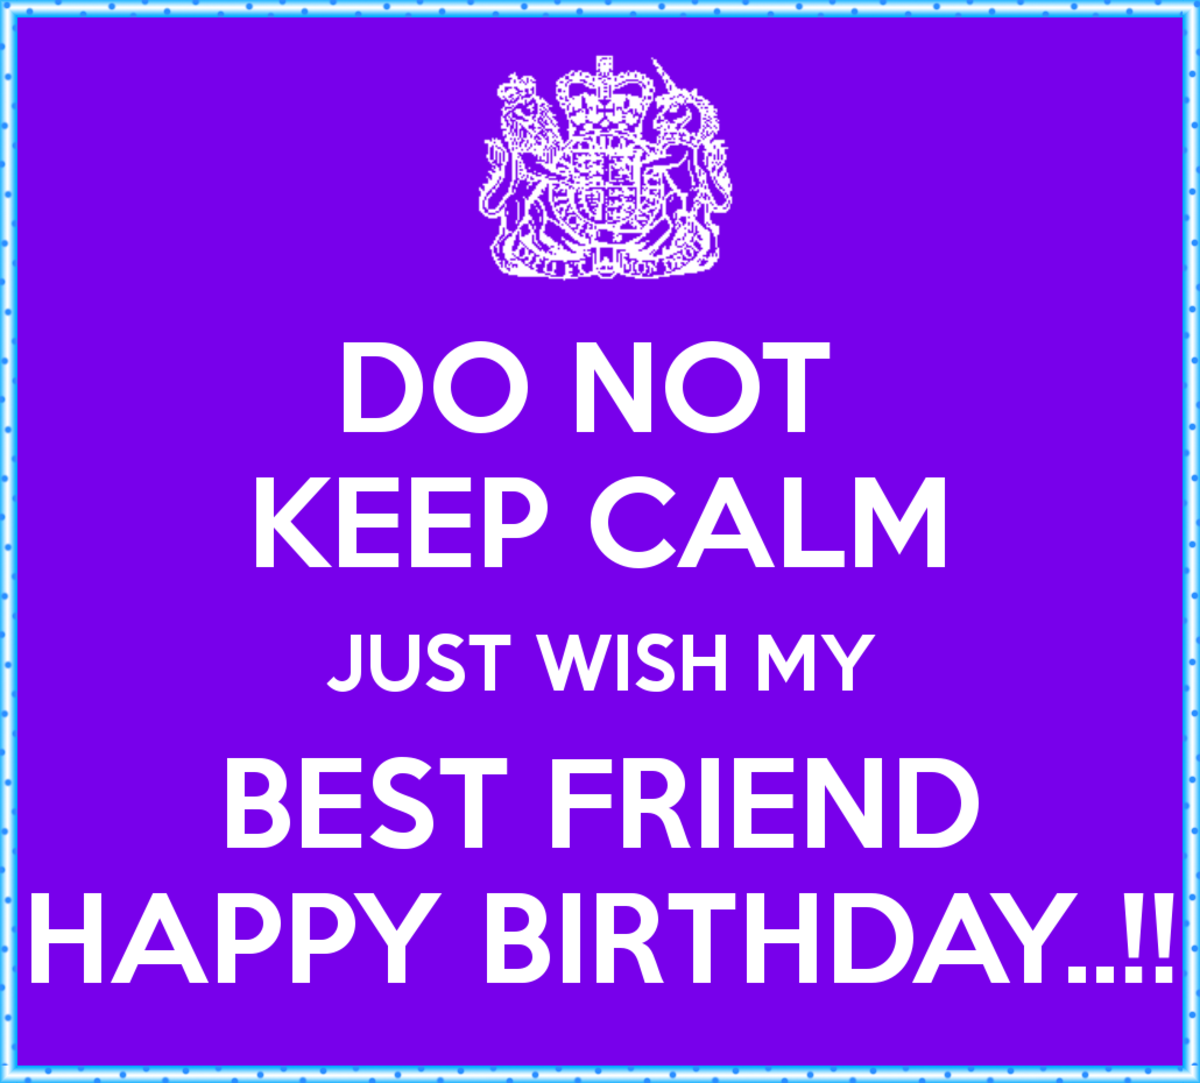 Happy Birthday Letter to My Best Friend | HubPages